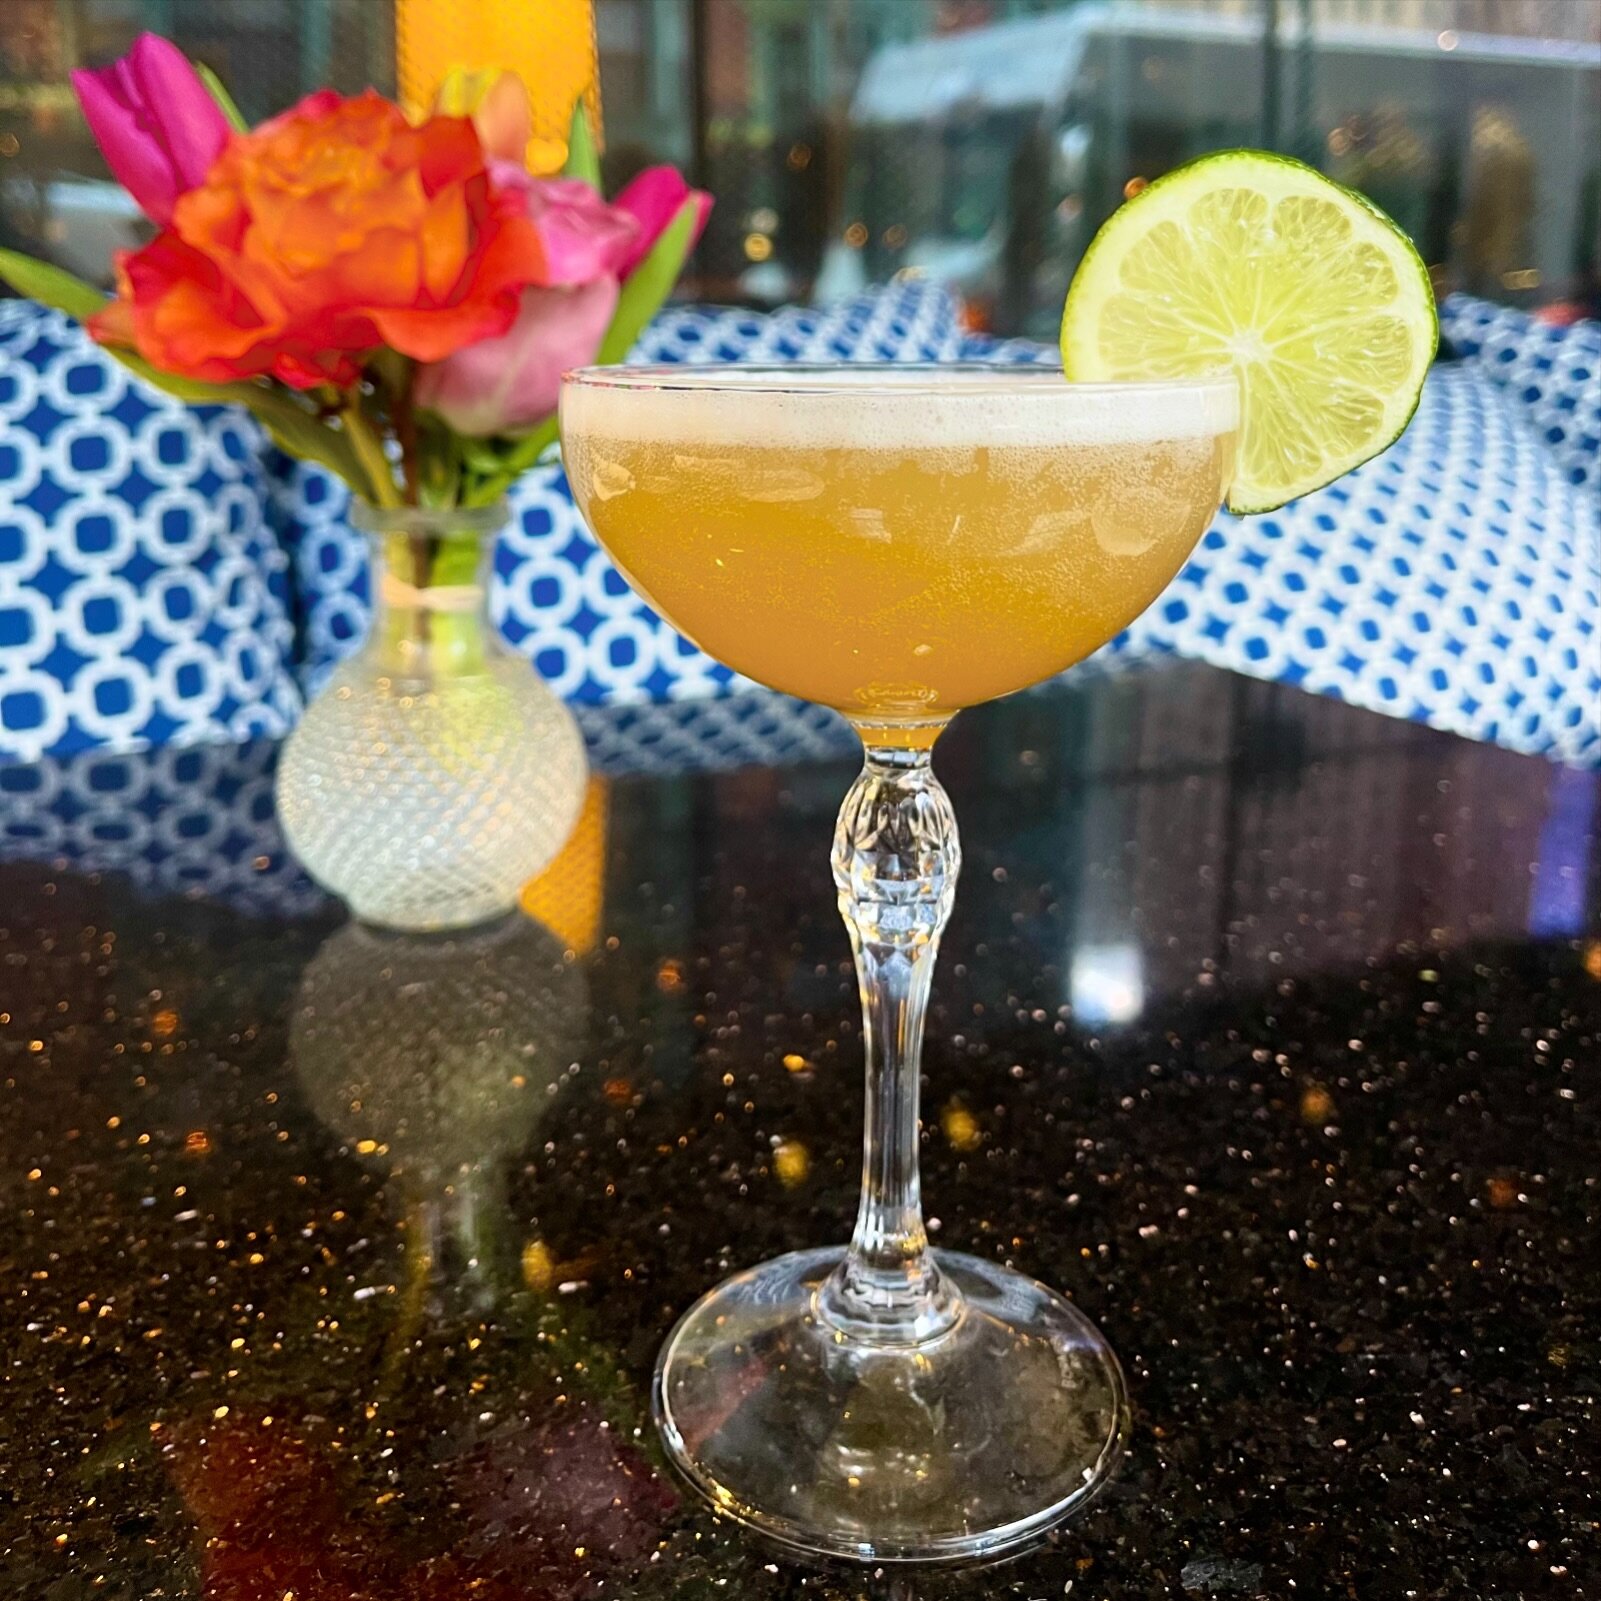 Manifesting warmer temps with one of our favorite cocktails the DOWN IN KOKOMO - plantation pineapple rum, cruzan passionfruit rum, pineapple &amp; lime juice! 🍍💐☀️

#daiquiririff #chicagococktails #alpanasrestaurant #goldcoastchicago #downtownchic